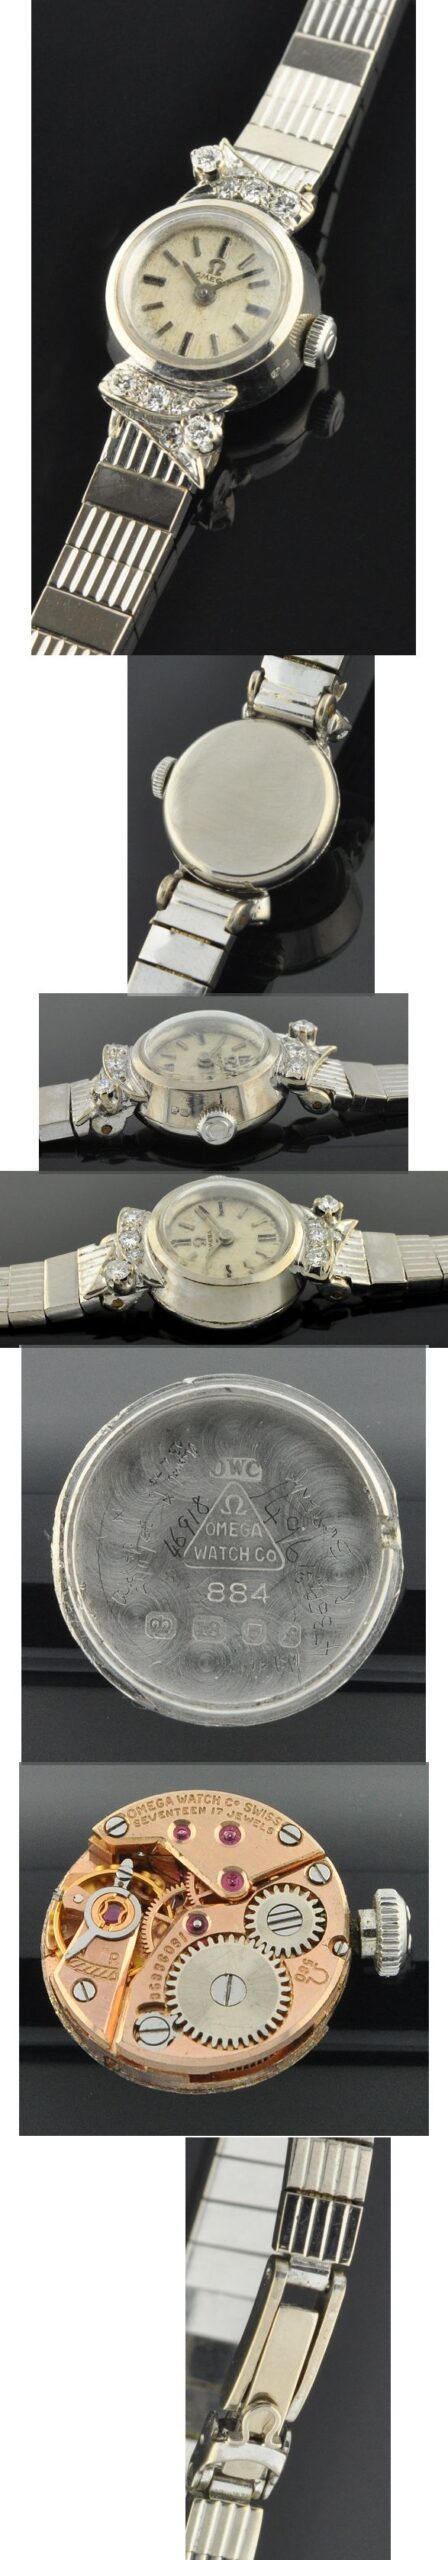 1973 Omega 18k white-gold ladies cocktail watch with original bracelet, logo buckle, hallmarked case, winding crown, and manual movement.